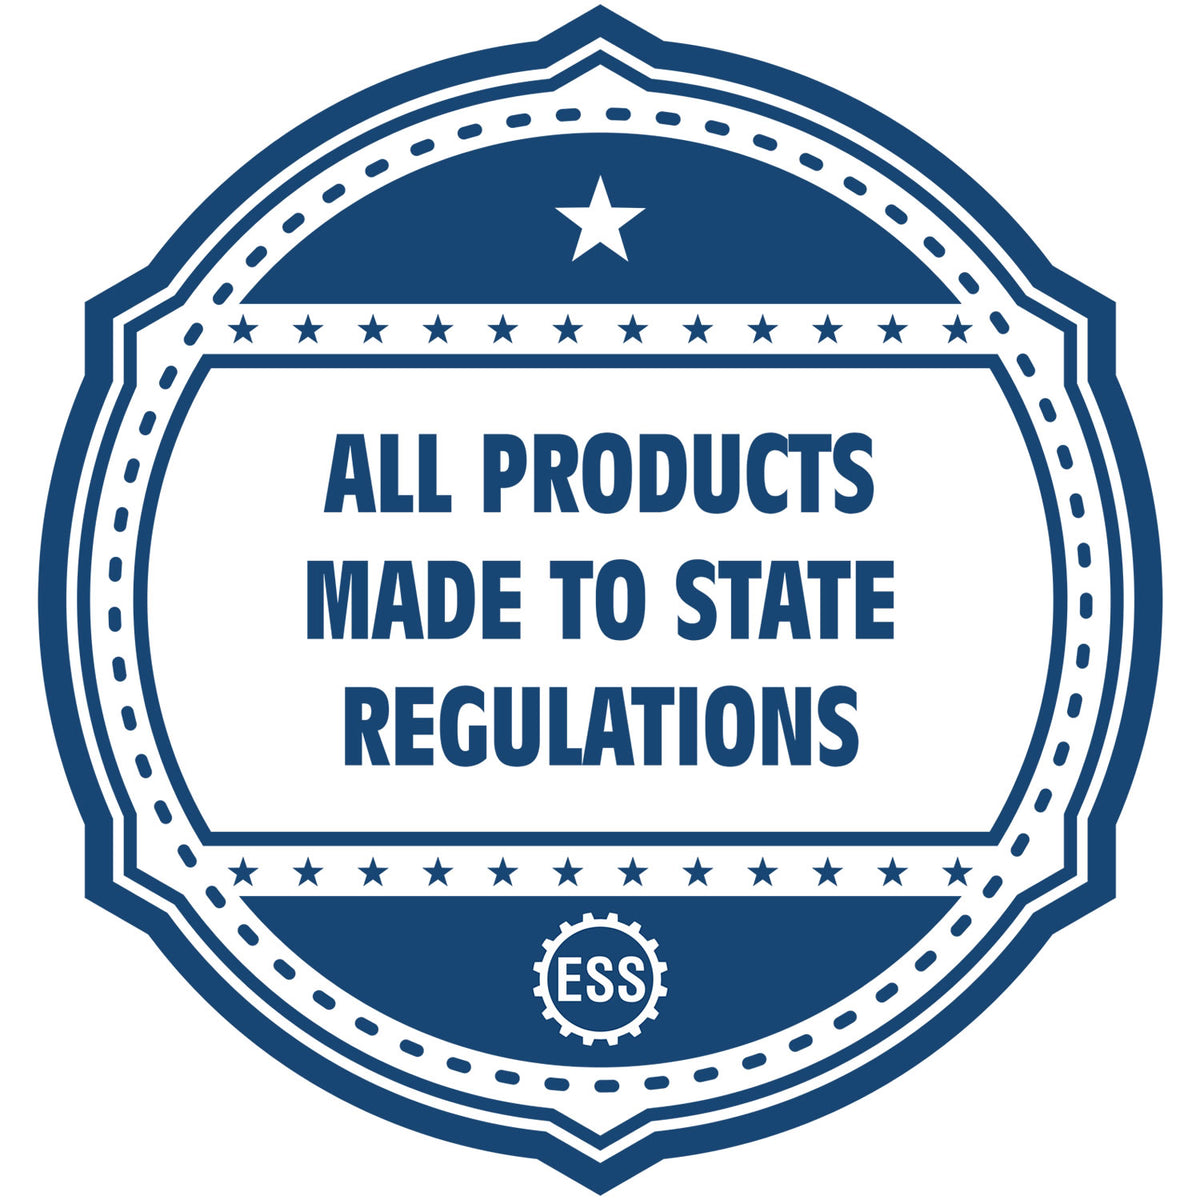 A blue icon or badge for the Hybrid Arkansas Landscape Architect Seal showing that this product is made in compliance with state regulations.